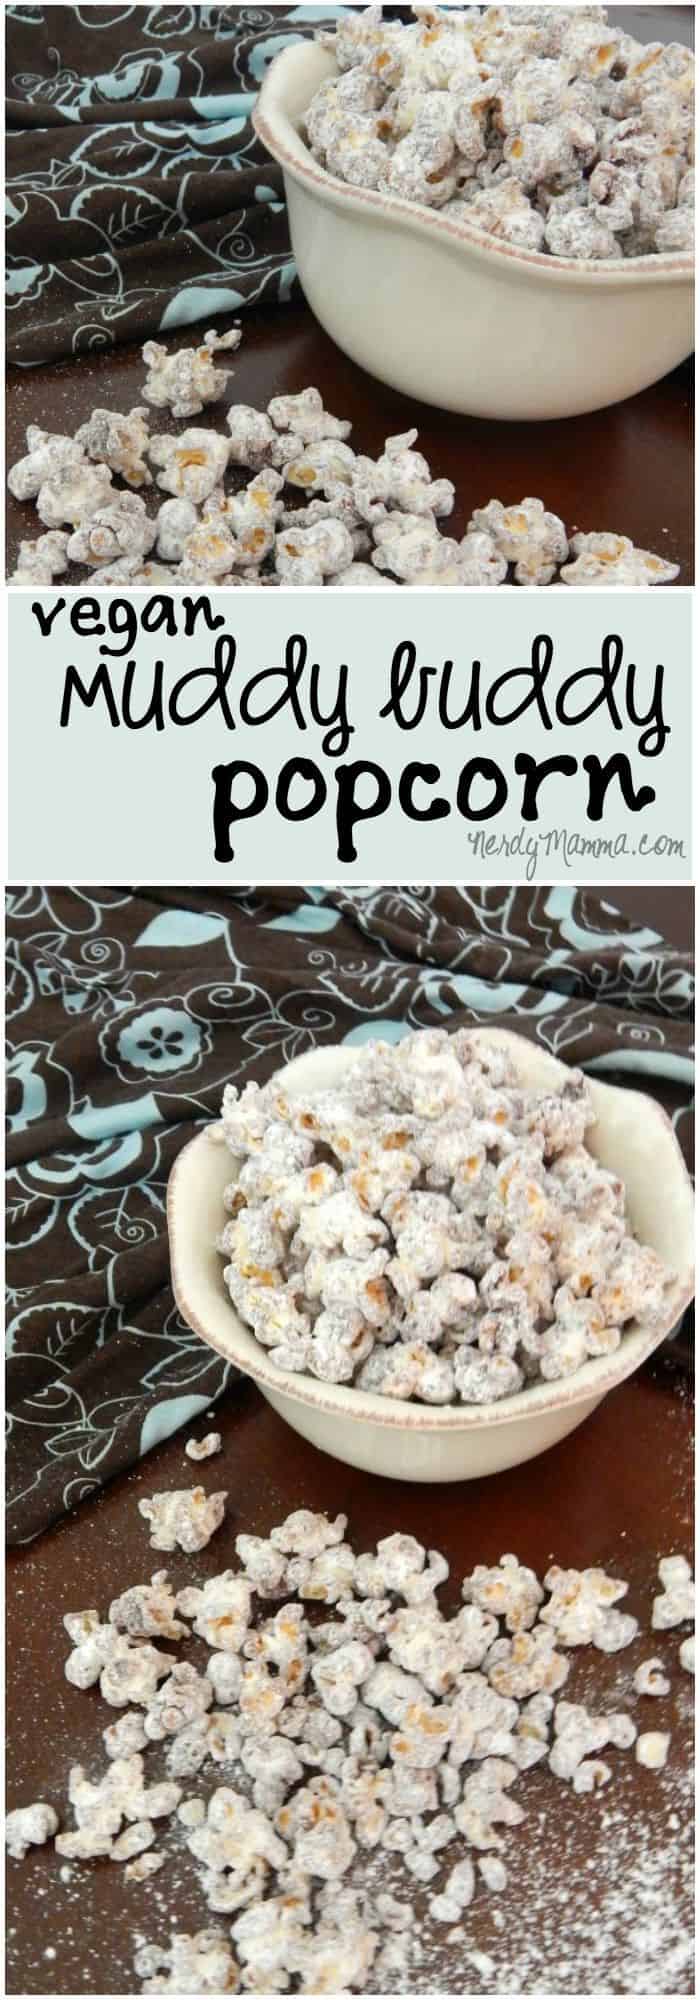 This popcorn recipe is the perfect vegan alternative to muddy buddies! Dairy-Free and Nut-Free, it's so good...